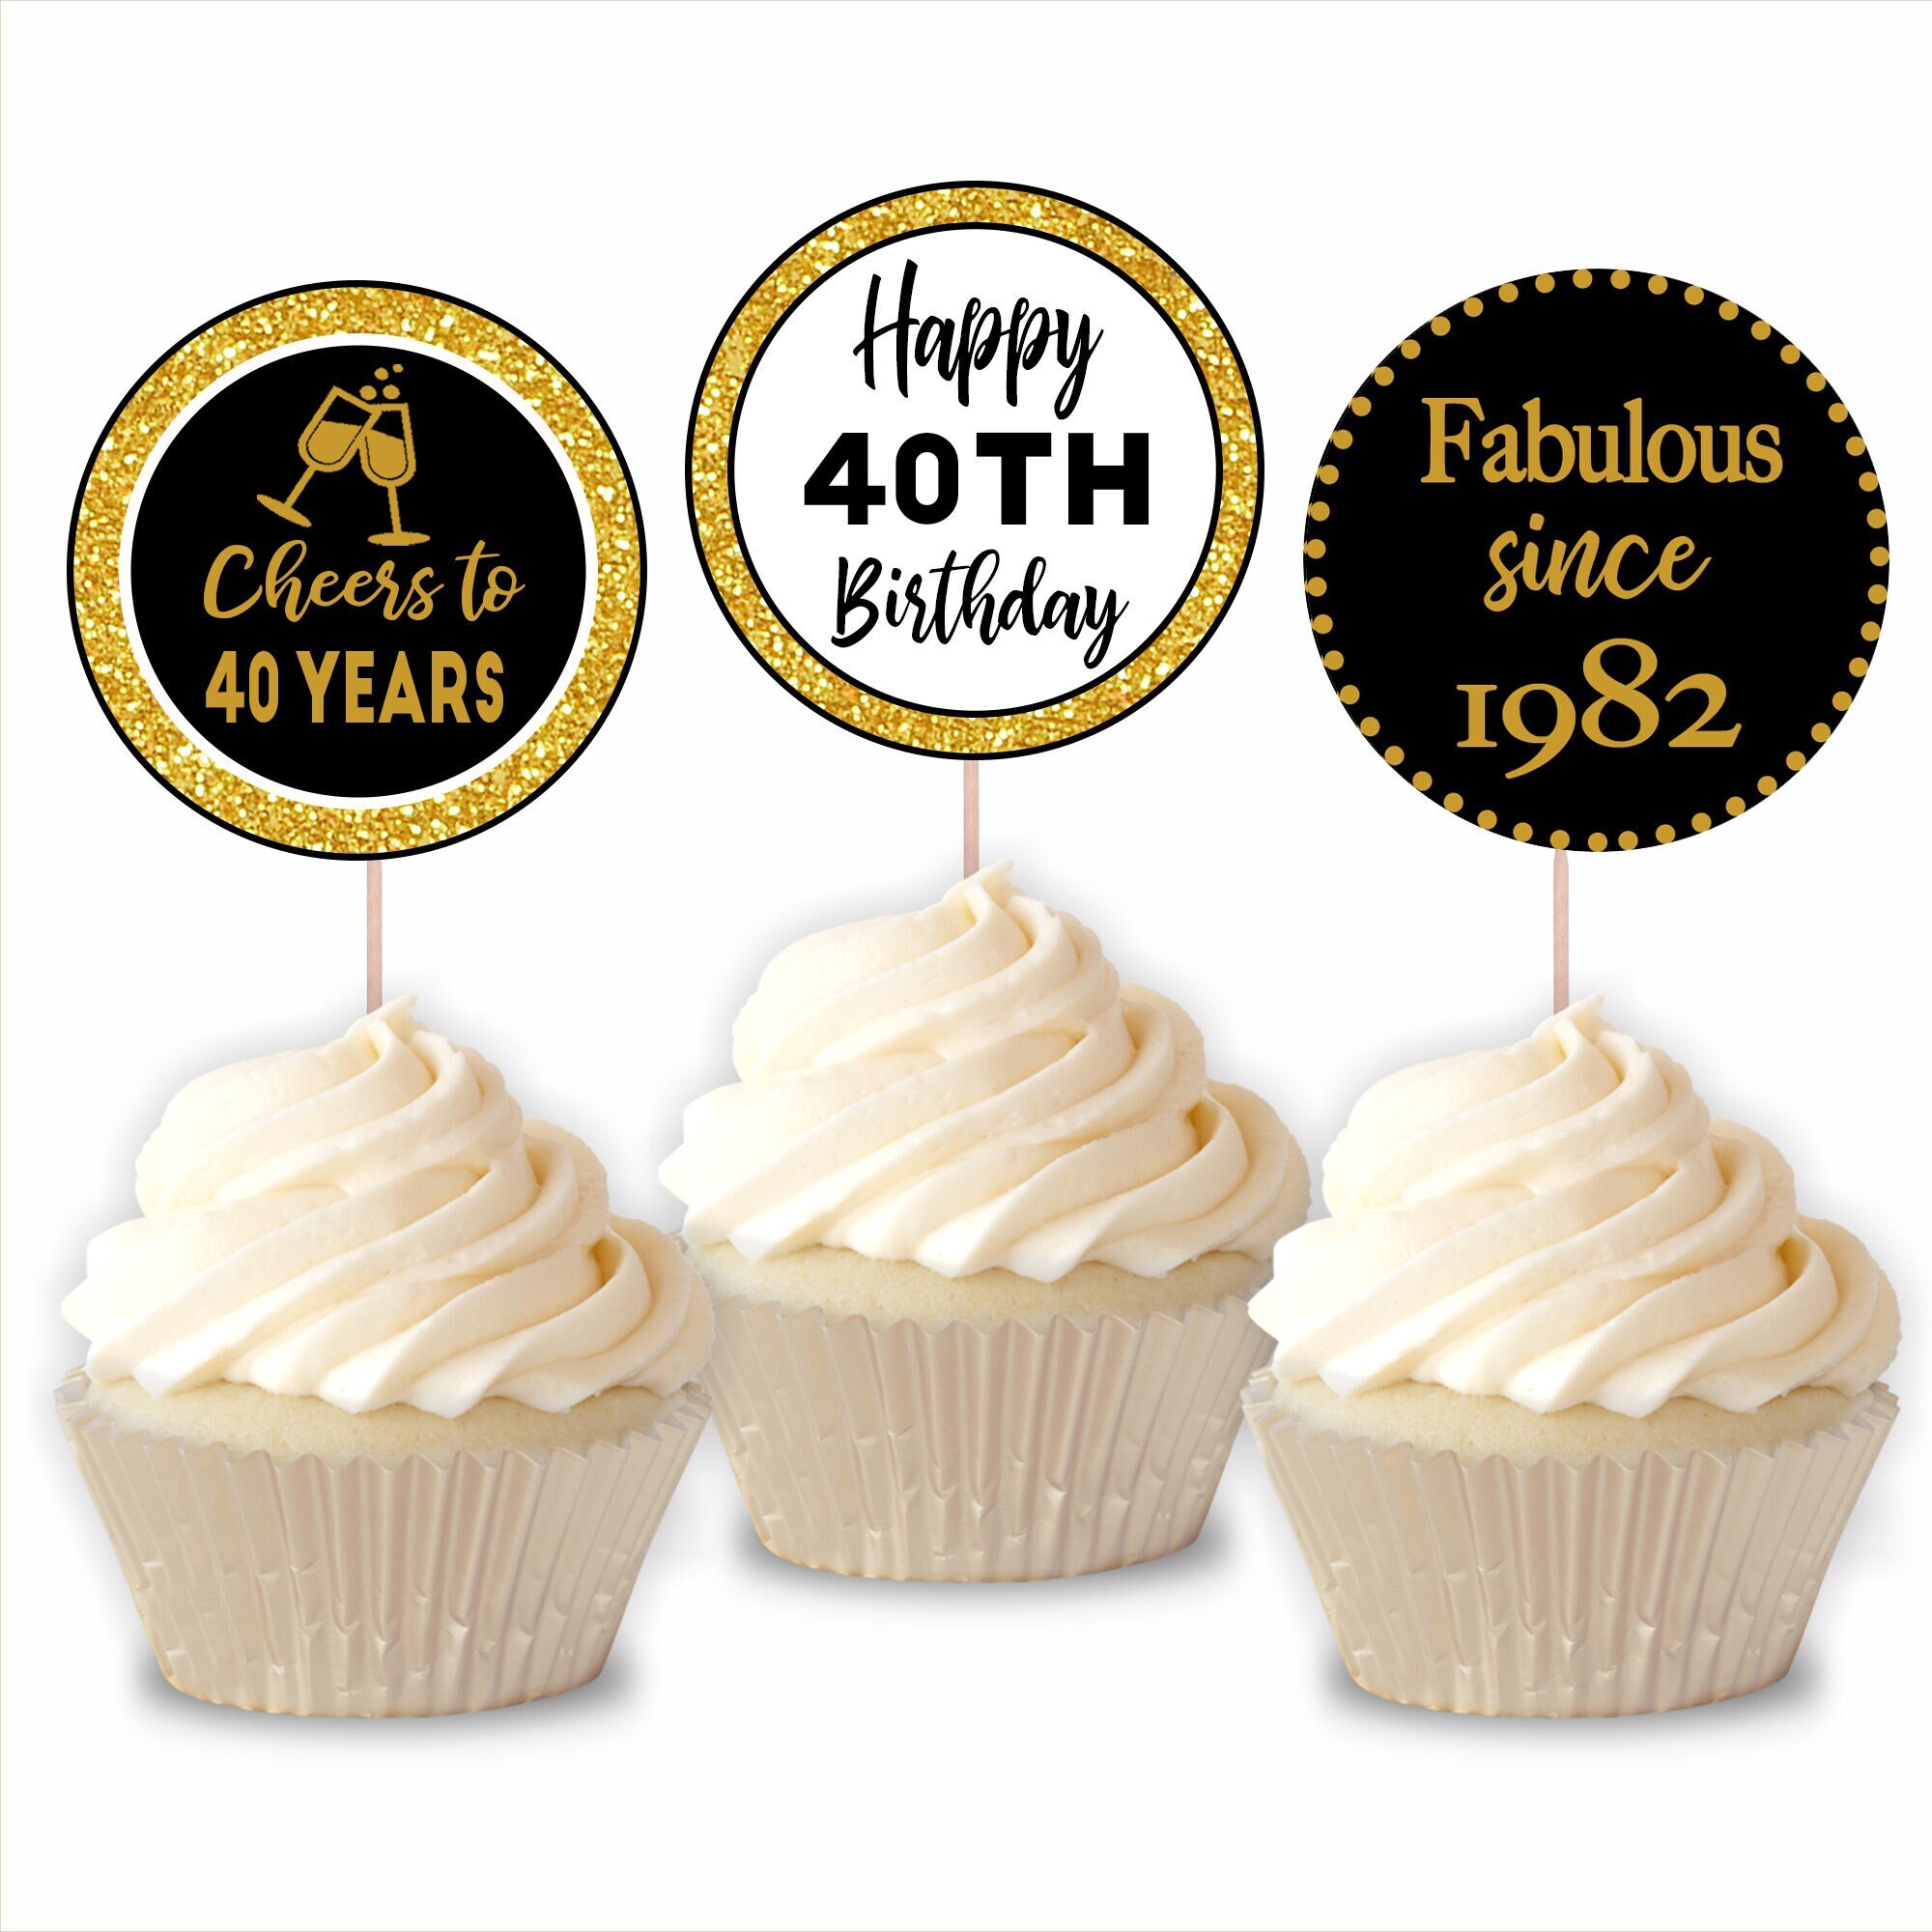 Gyufise 30Pcs Black Glitter Vintage 1982 Cupcake Toppers Awesome Since 1982 Cake Decorations Cheers to 40 Fabulous Forty Cupcake Picks 40th Birthday Wedding Anniversary Party Cake Decorations Supplies 